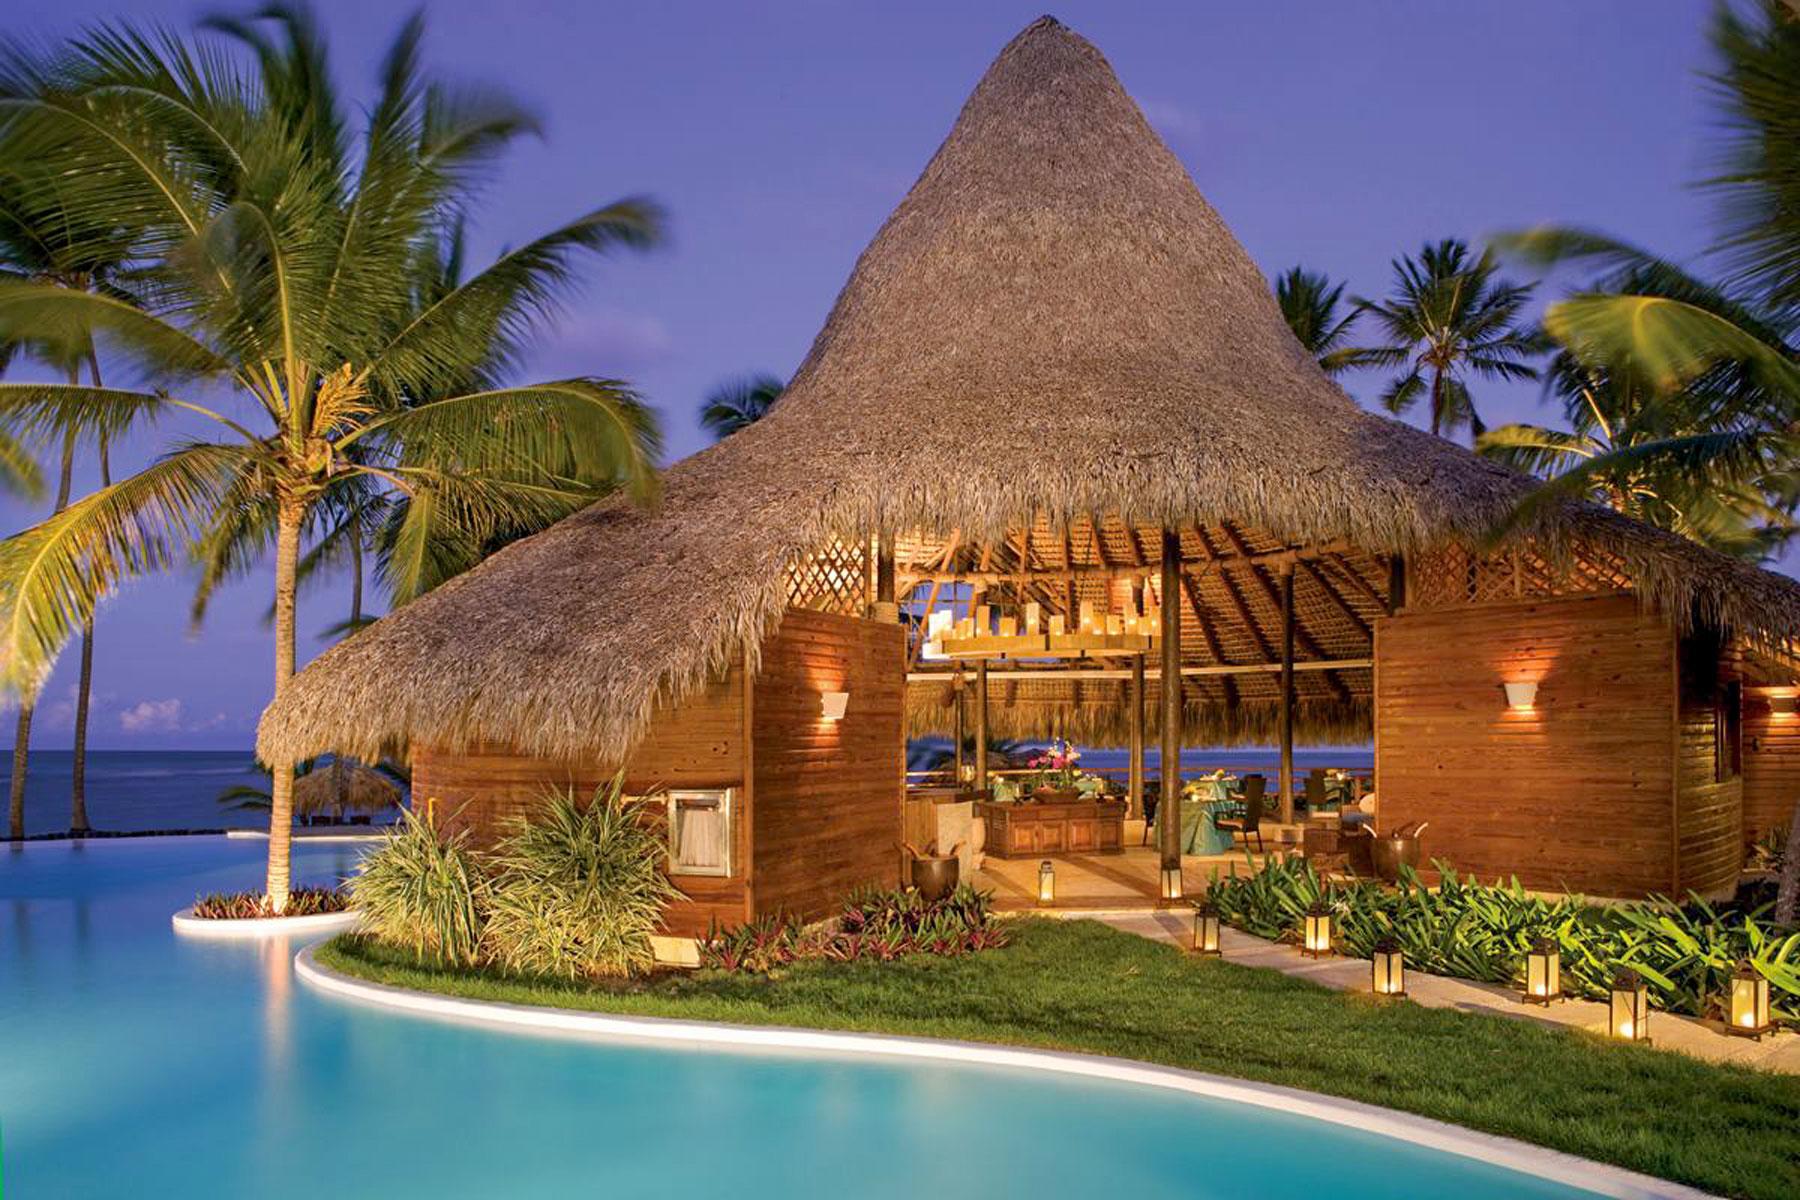 Best All Inclusive Resorts For Couples 2022 - Image to u